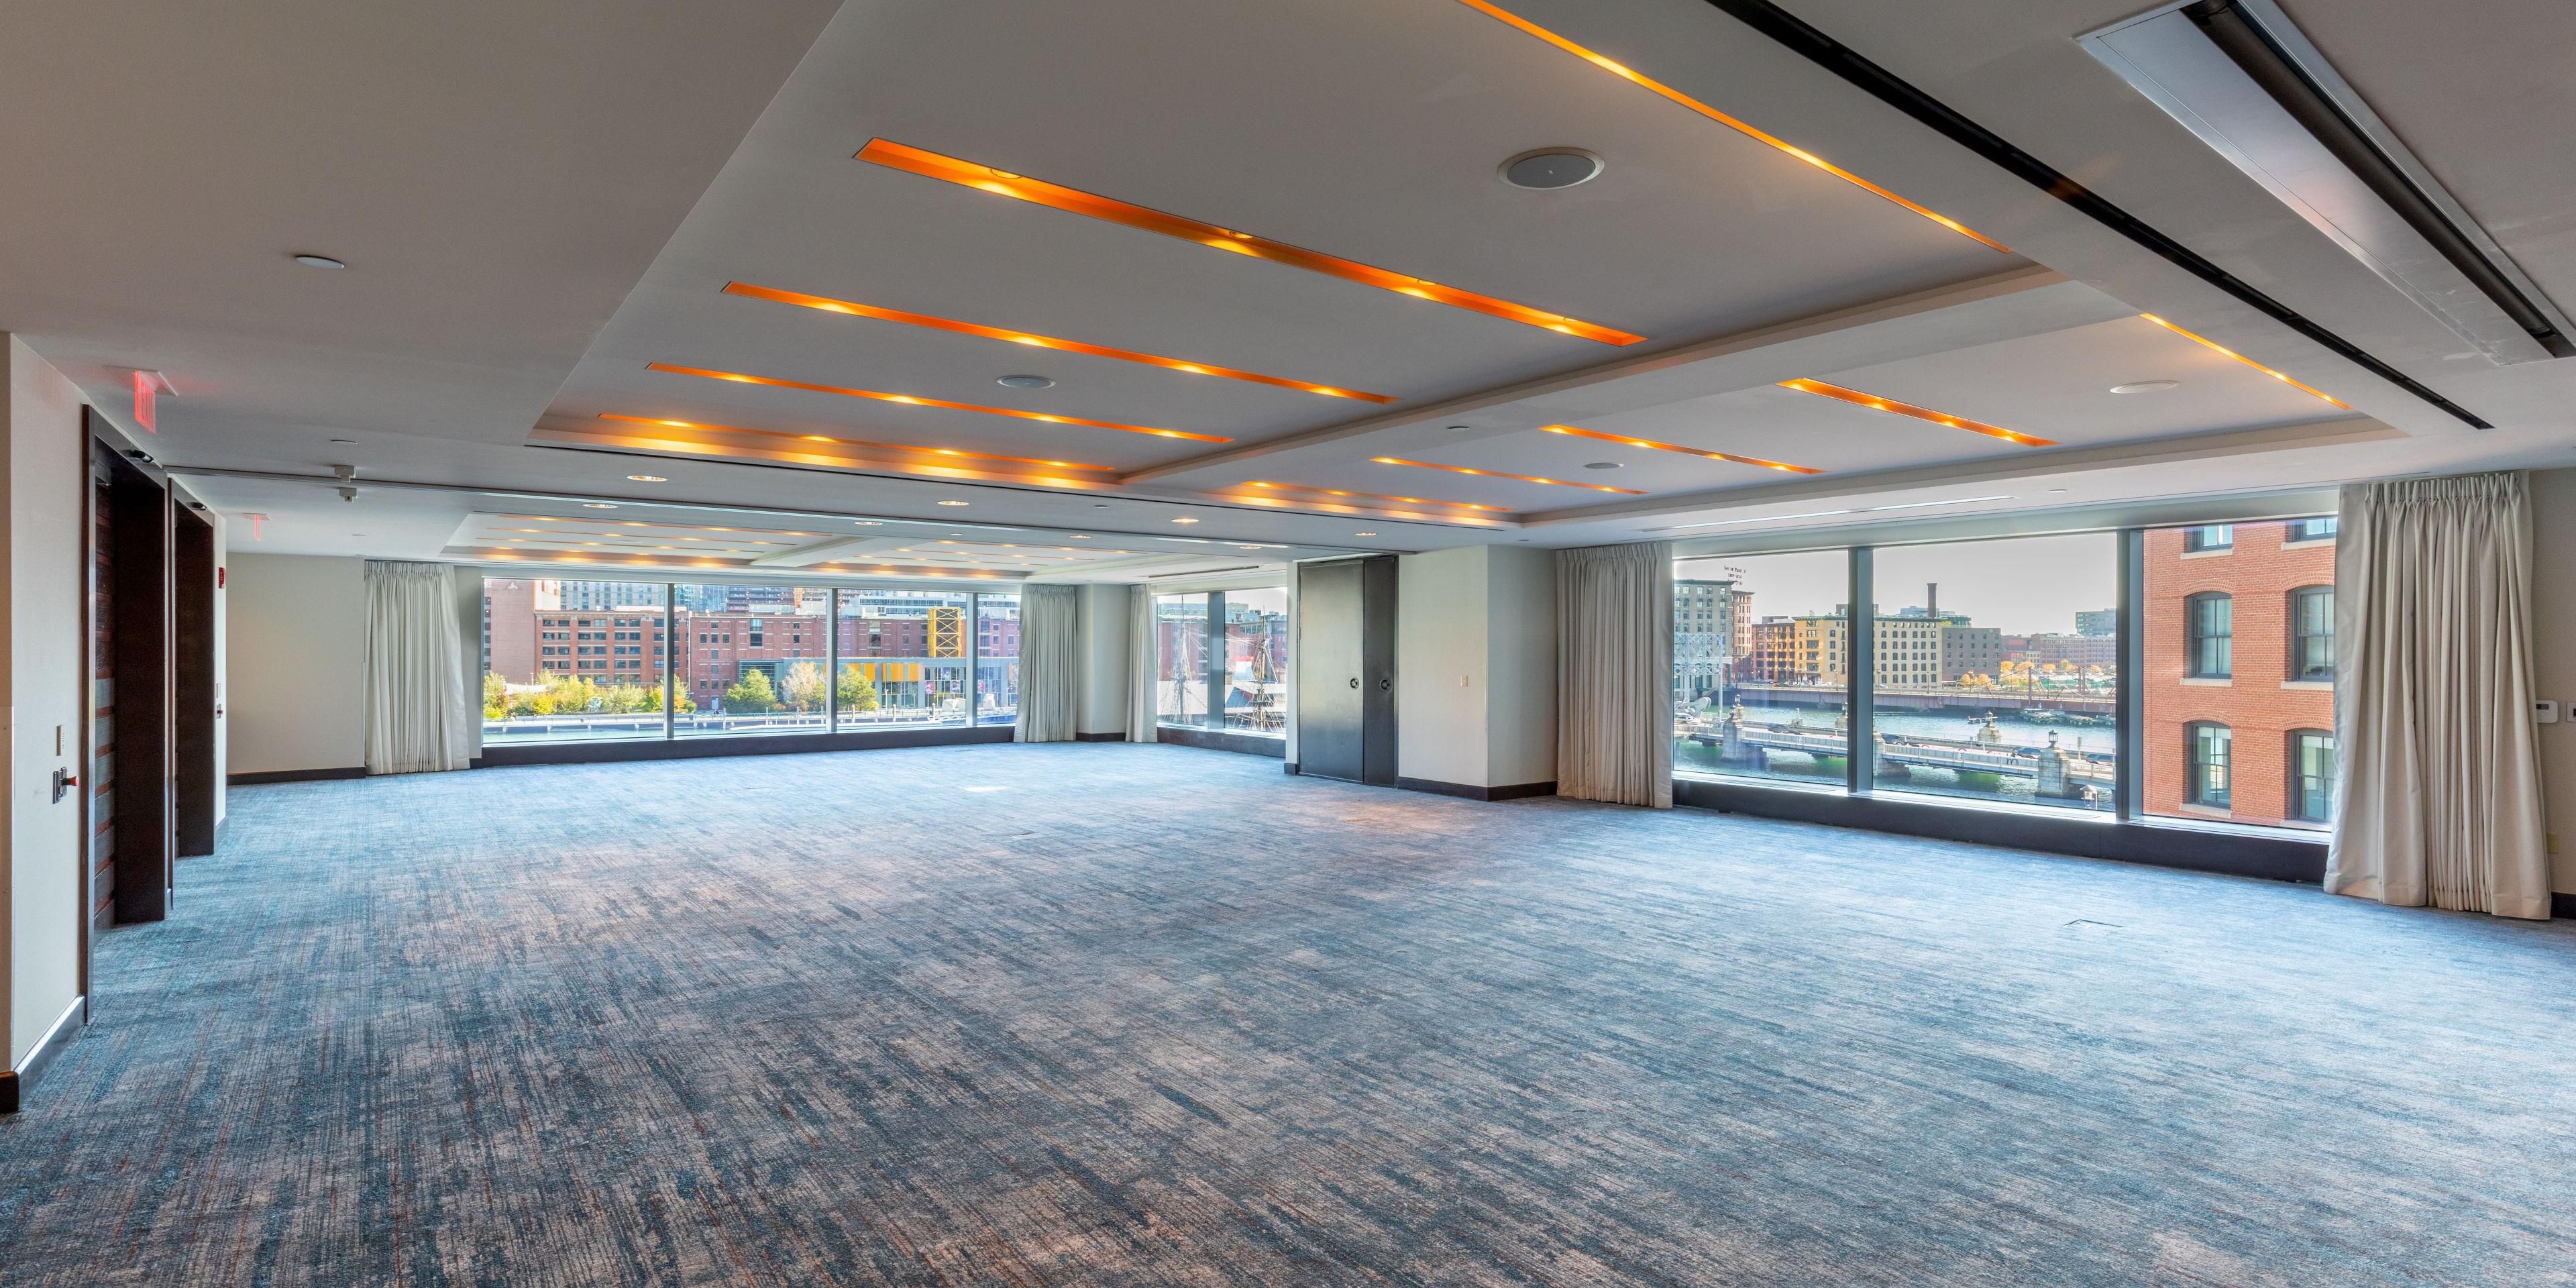 Immerse yourself in our exceptional meeting space at InterContinental Boston, where culinary excellence meets stunning aesthetics. With floor-to-ceiling windows offering panoramic views, you'll find inspiration in the natural beauty of Boston's waterfront. Elevate your event with on-site AV support by Encore, ample branding opportunities and more.